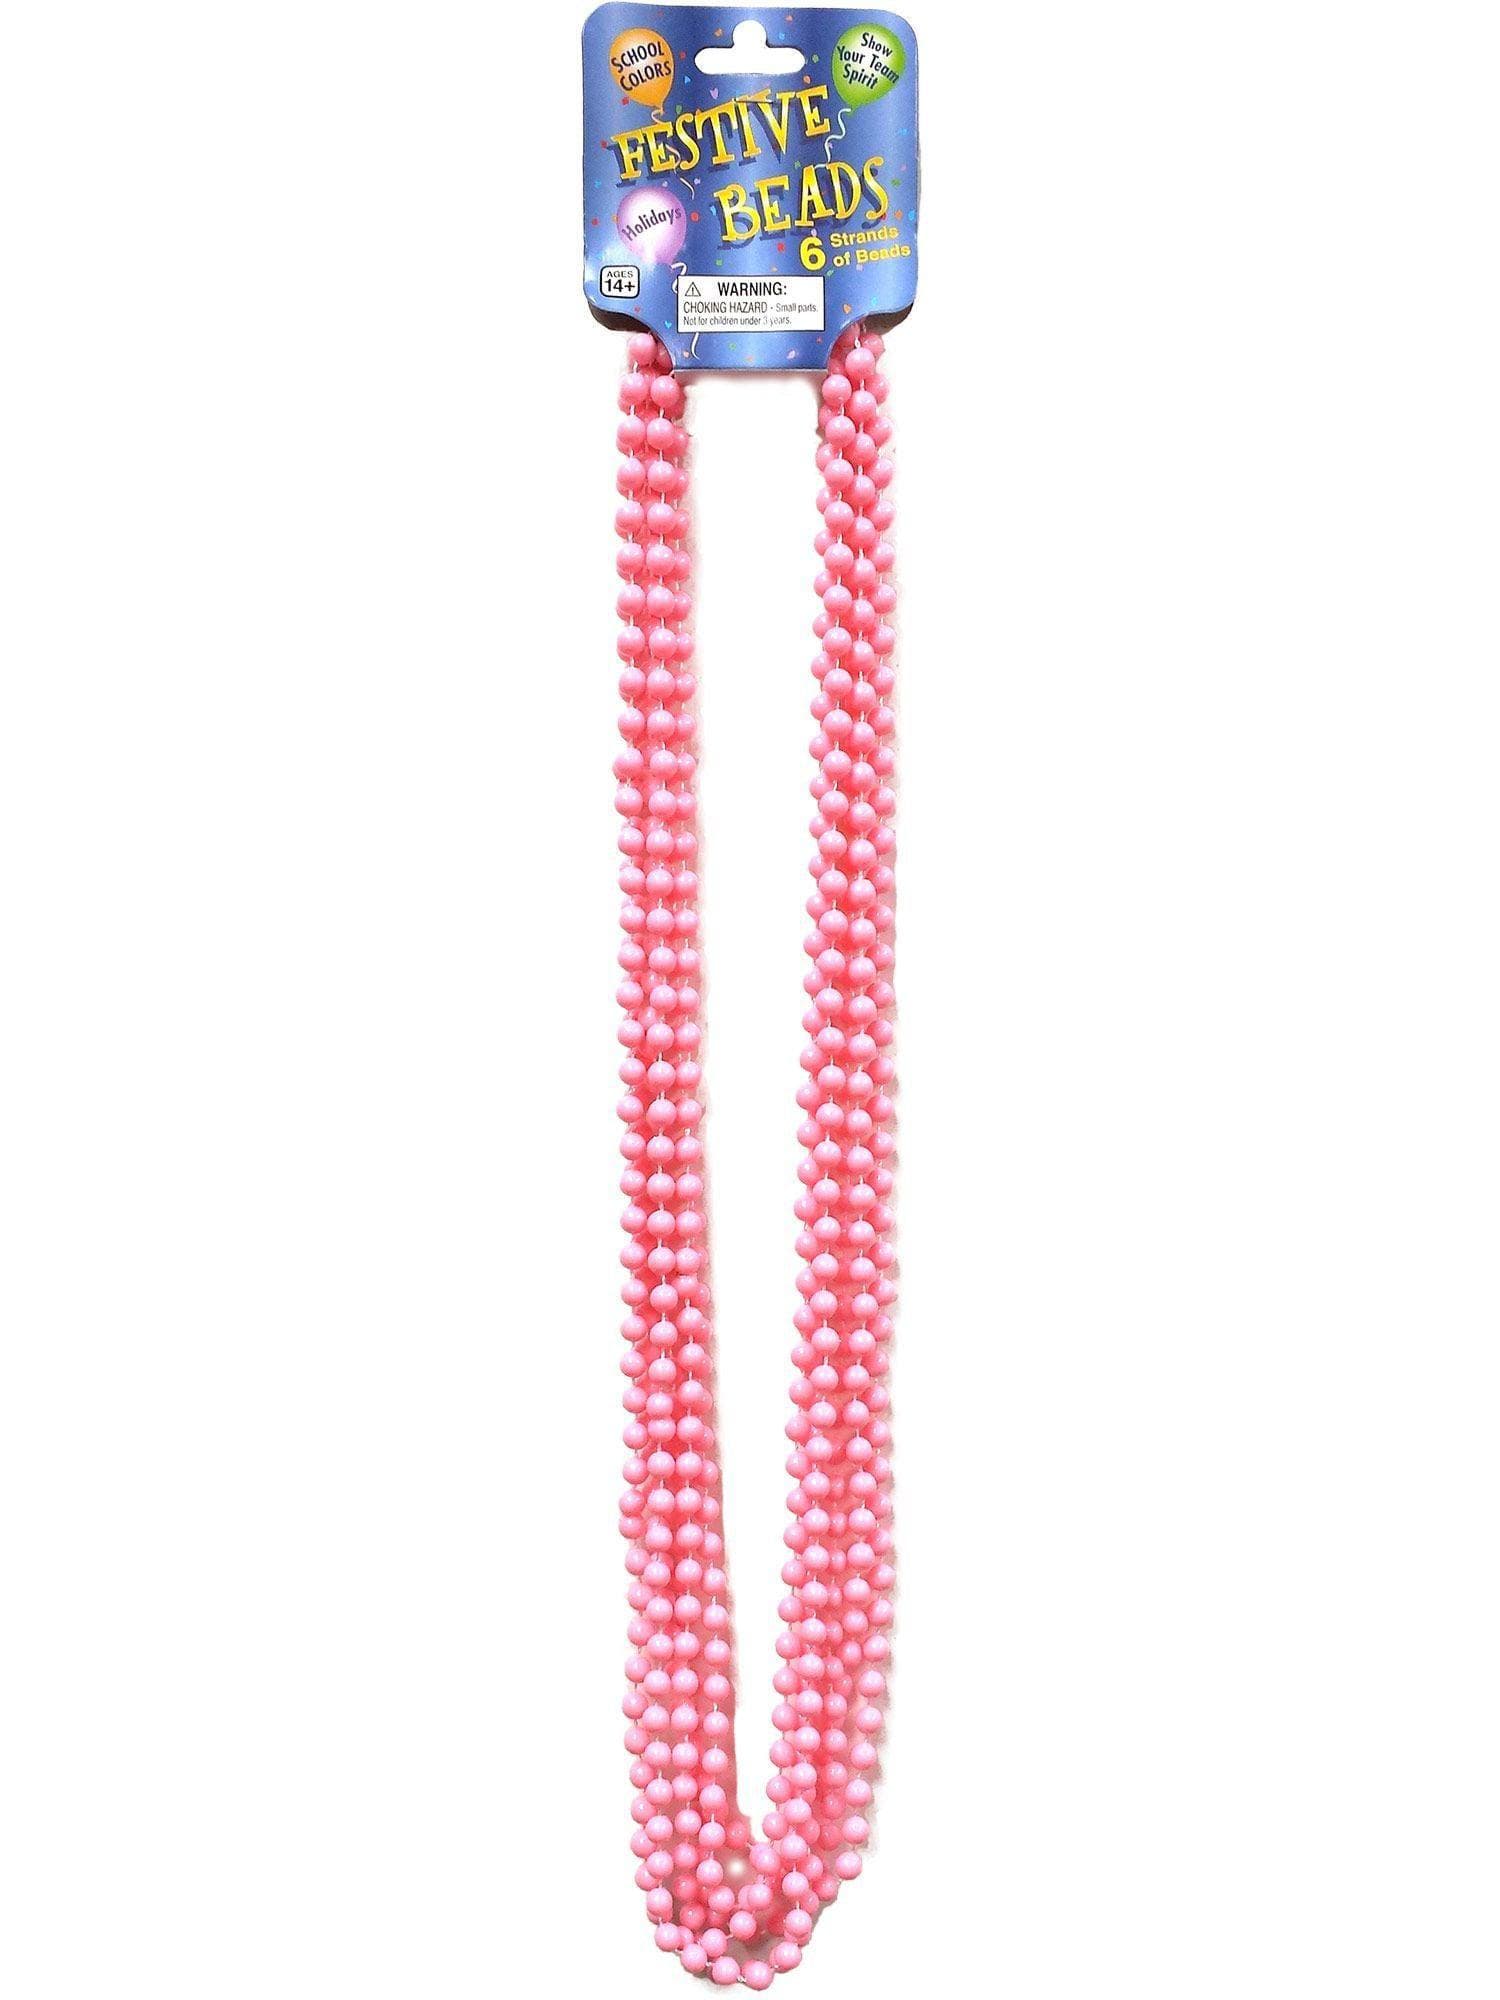 Pink Bead Necklace - costumes.com